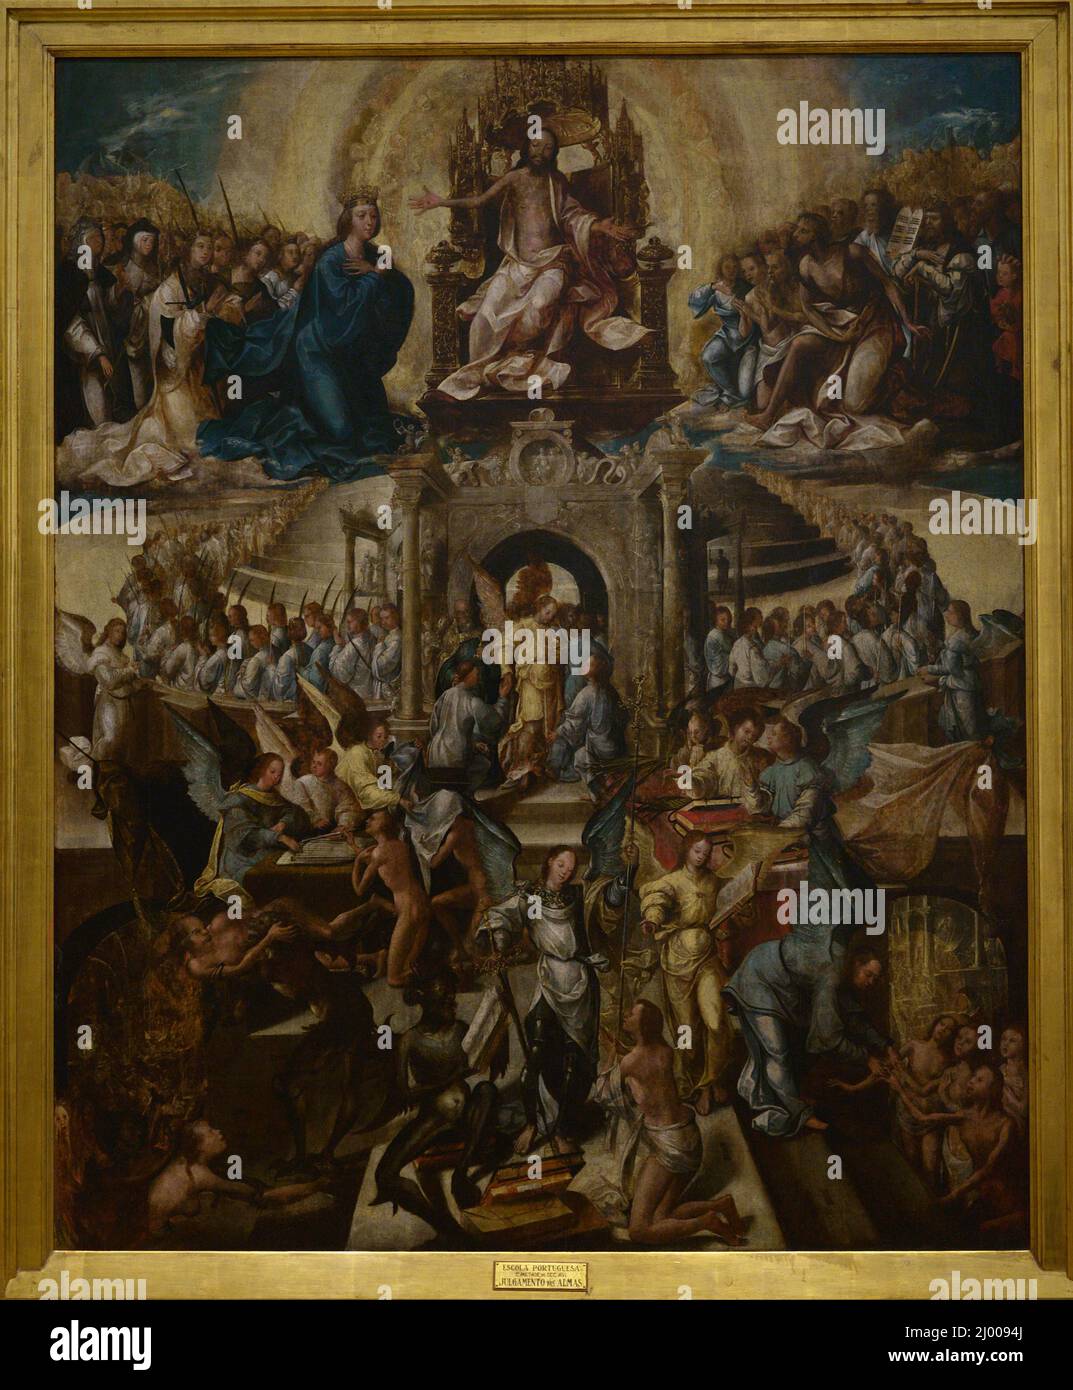 Master of 1549. 'The Last Judgment'. Oil on oak panel, 1540-1550. From the Monastery of Sao Bento da Saúde, Lisbon, Portugal. National Museum of Ancient Art. Lisbon, Portugal. Stock Photo